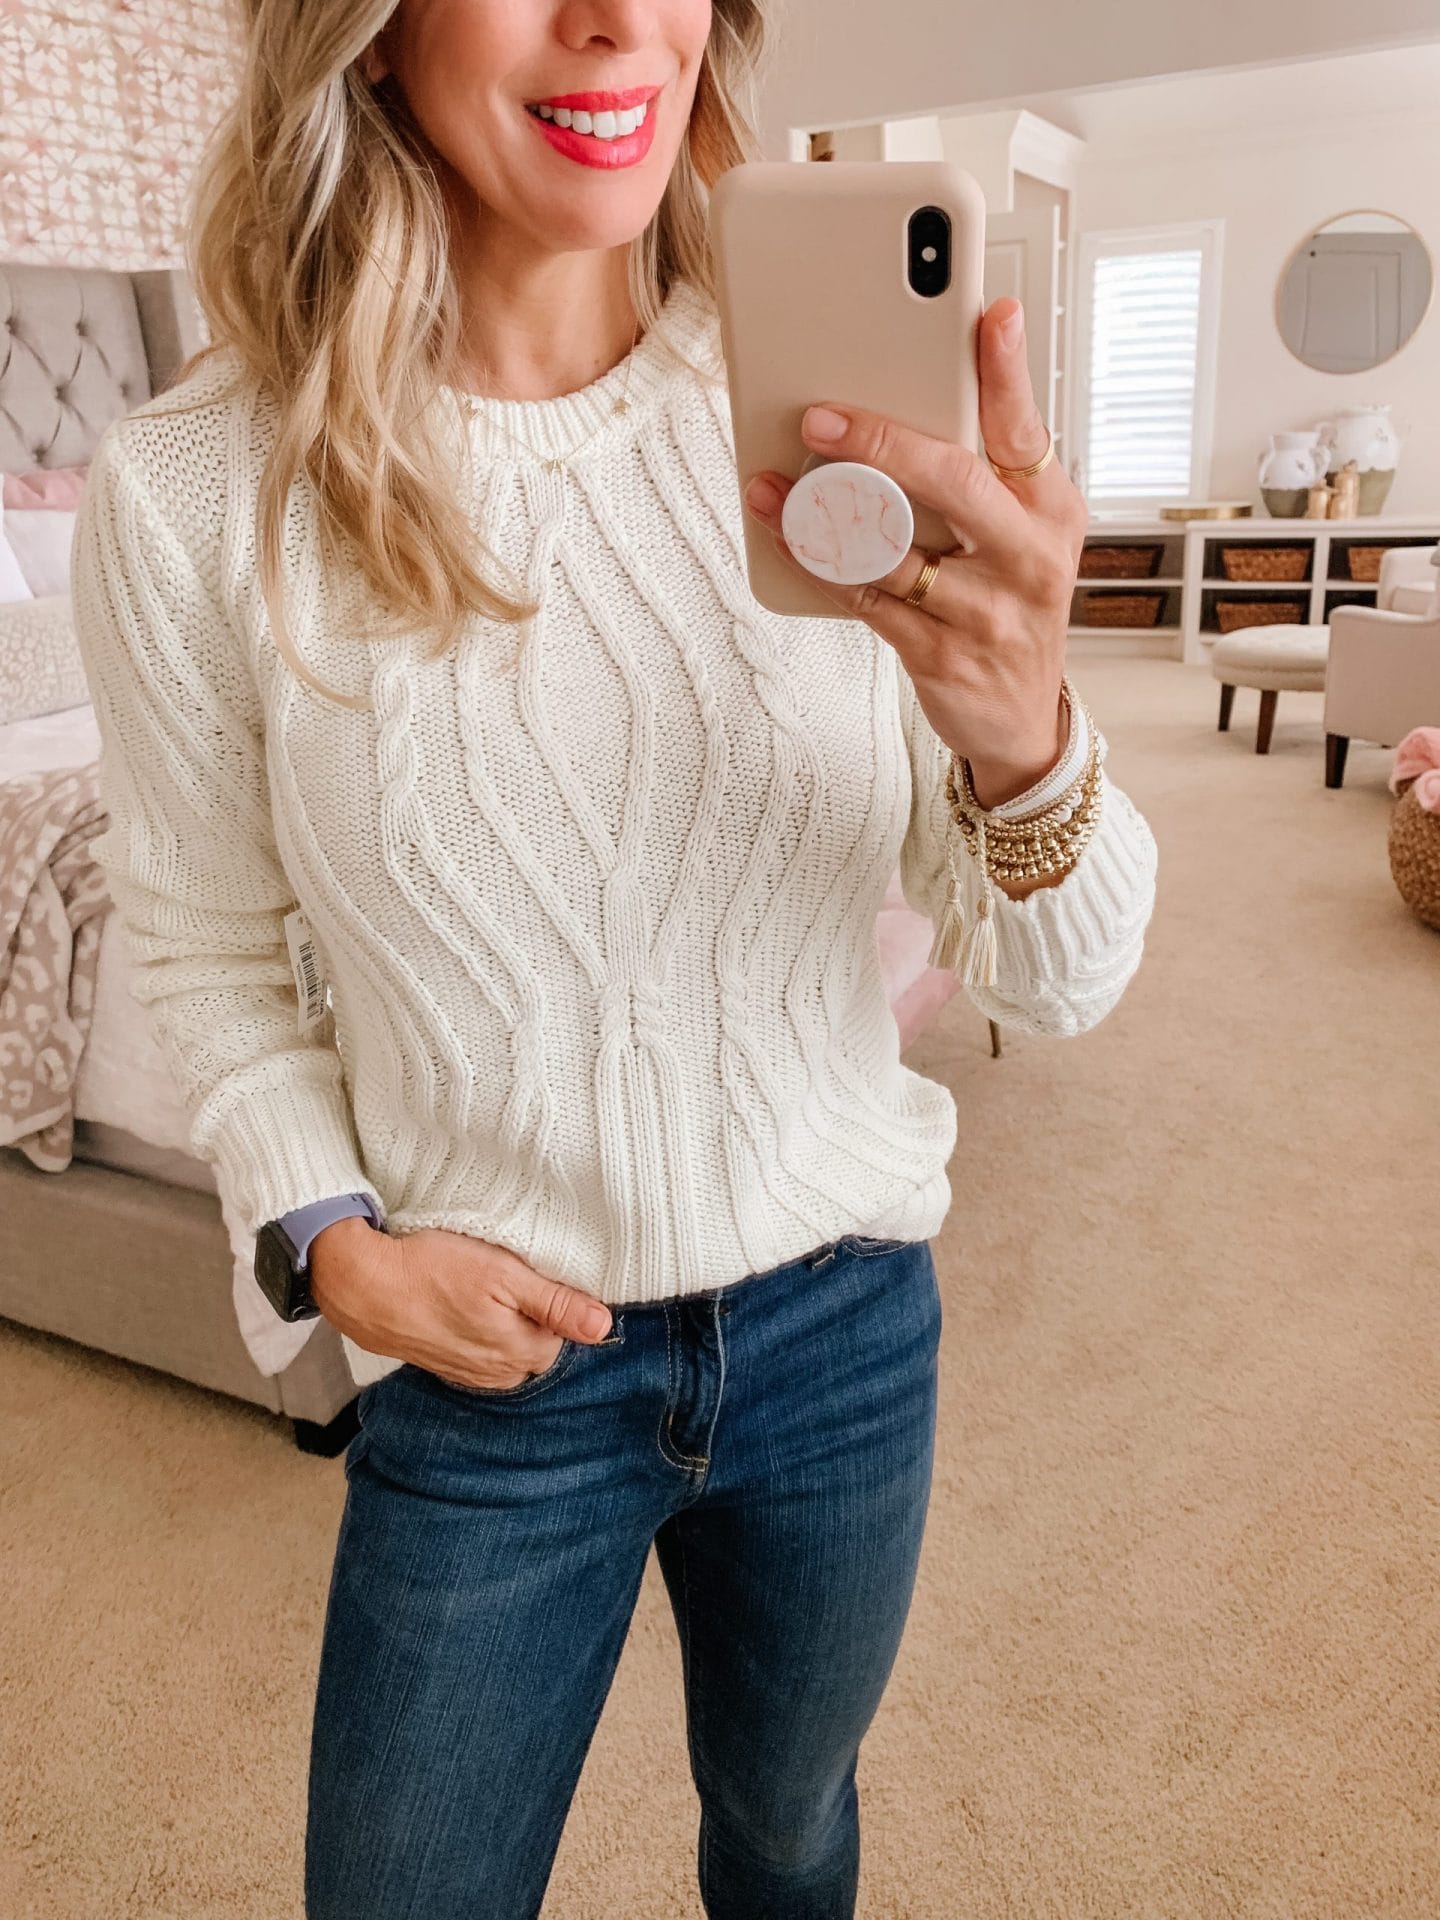 Amazon Fashion Finds, Sweater, Jeans, Booties 